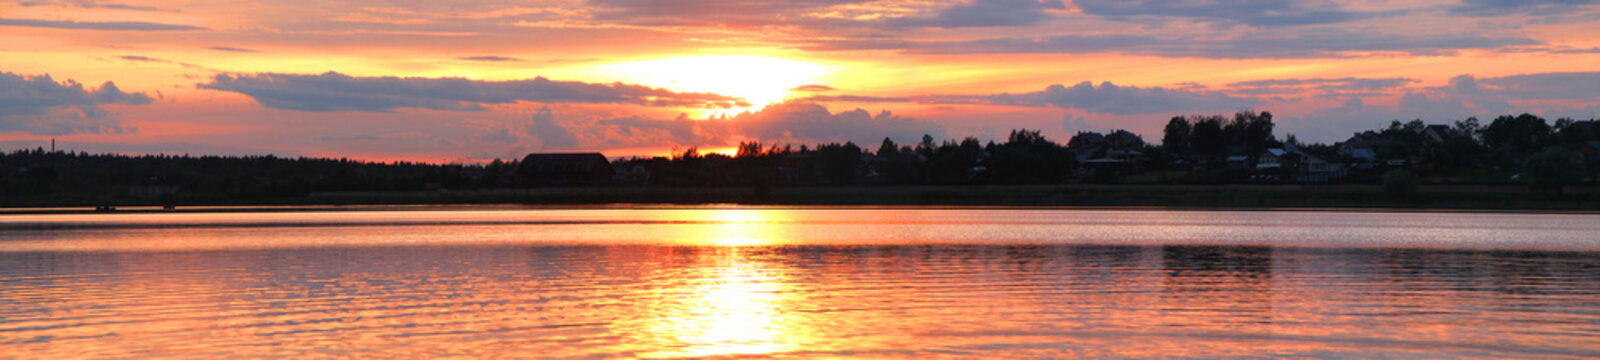 Panorama of the sunset overlooking the lake and the house and trees on the opposite coast.